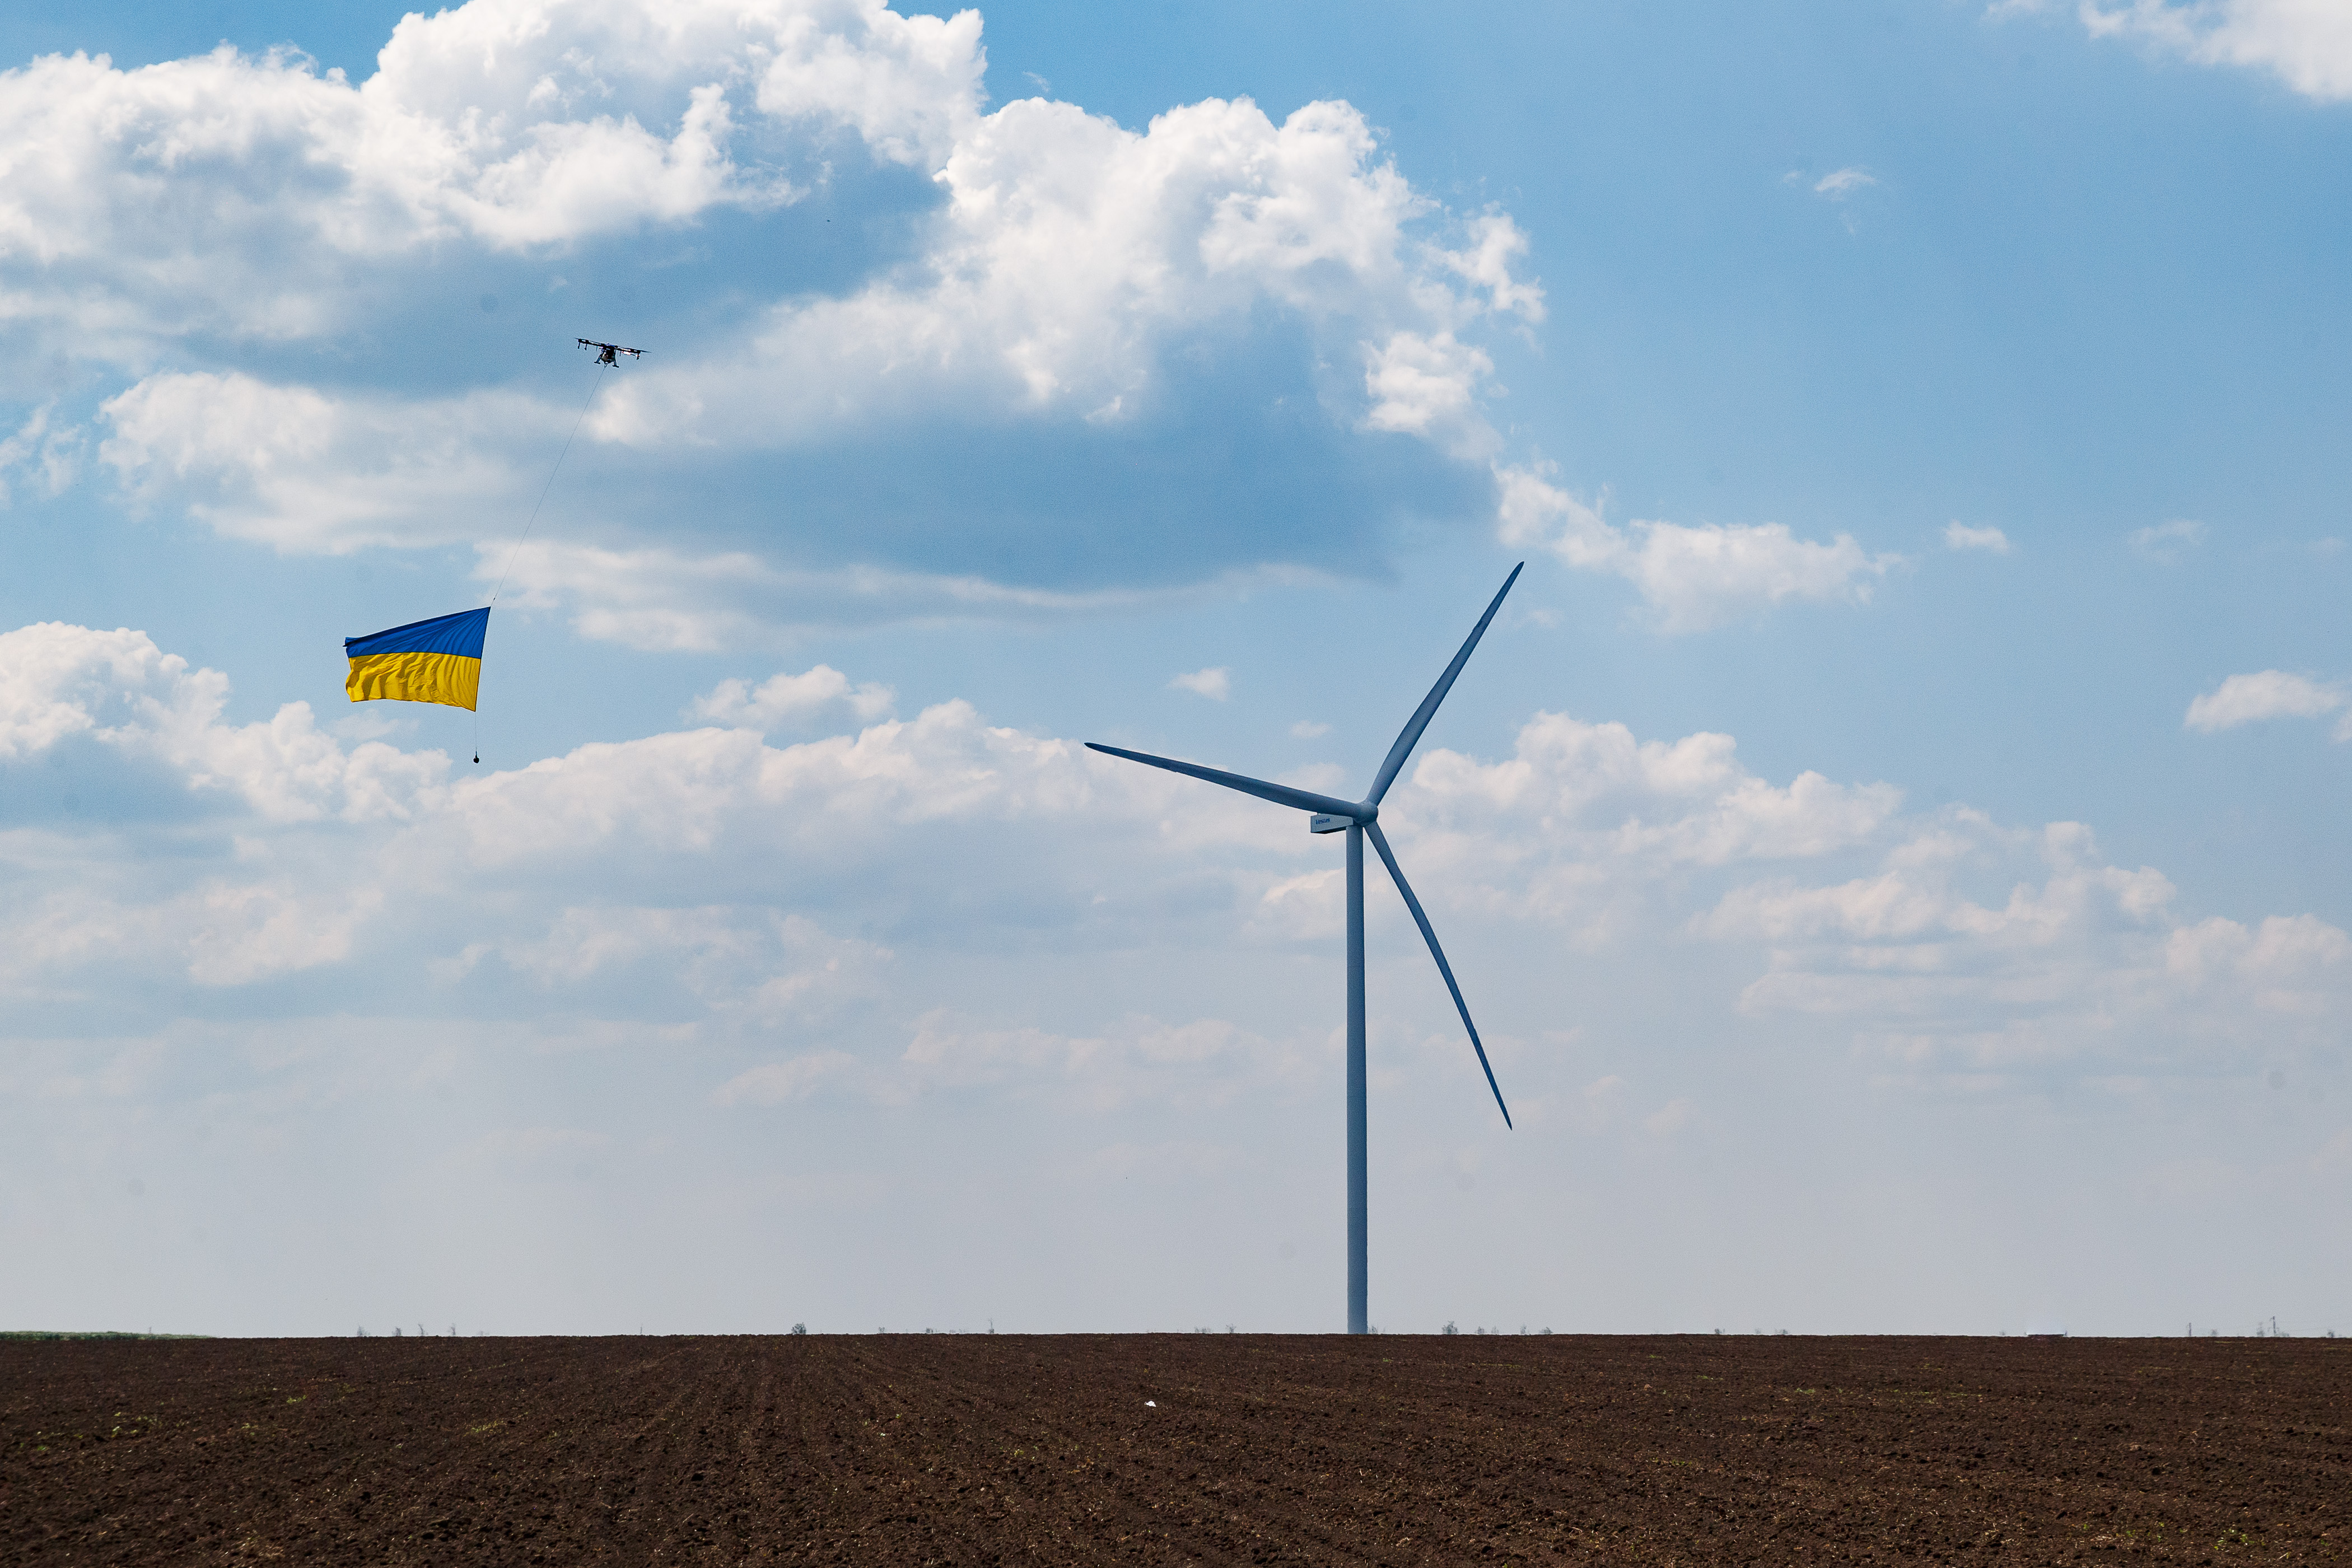 DTEK opens wind farm in Ukraine amid war to build back greener after russian attacks. Picture 1